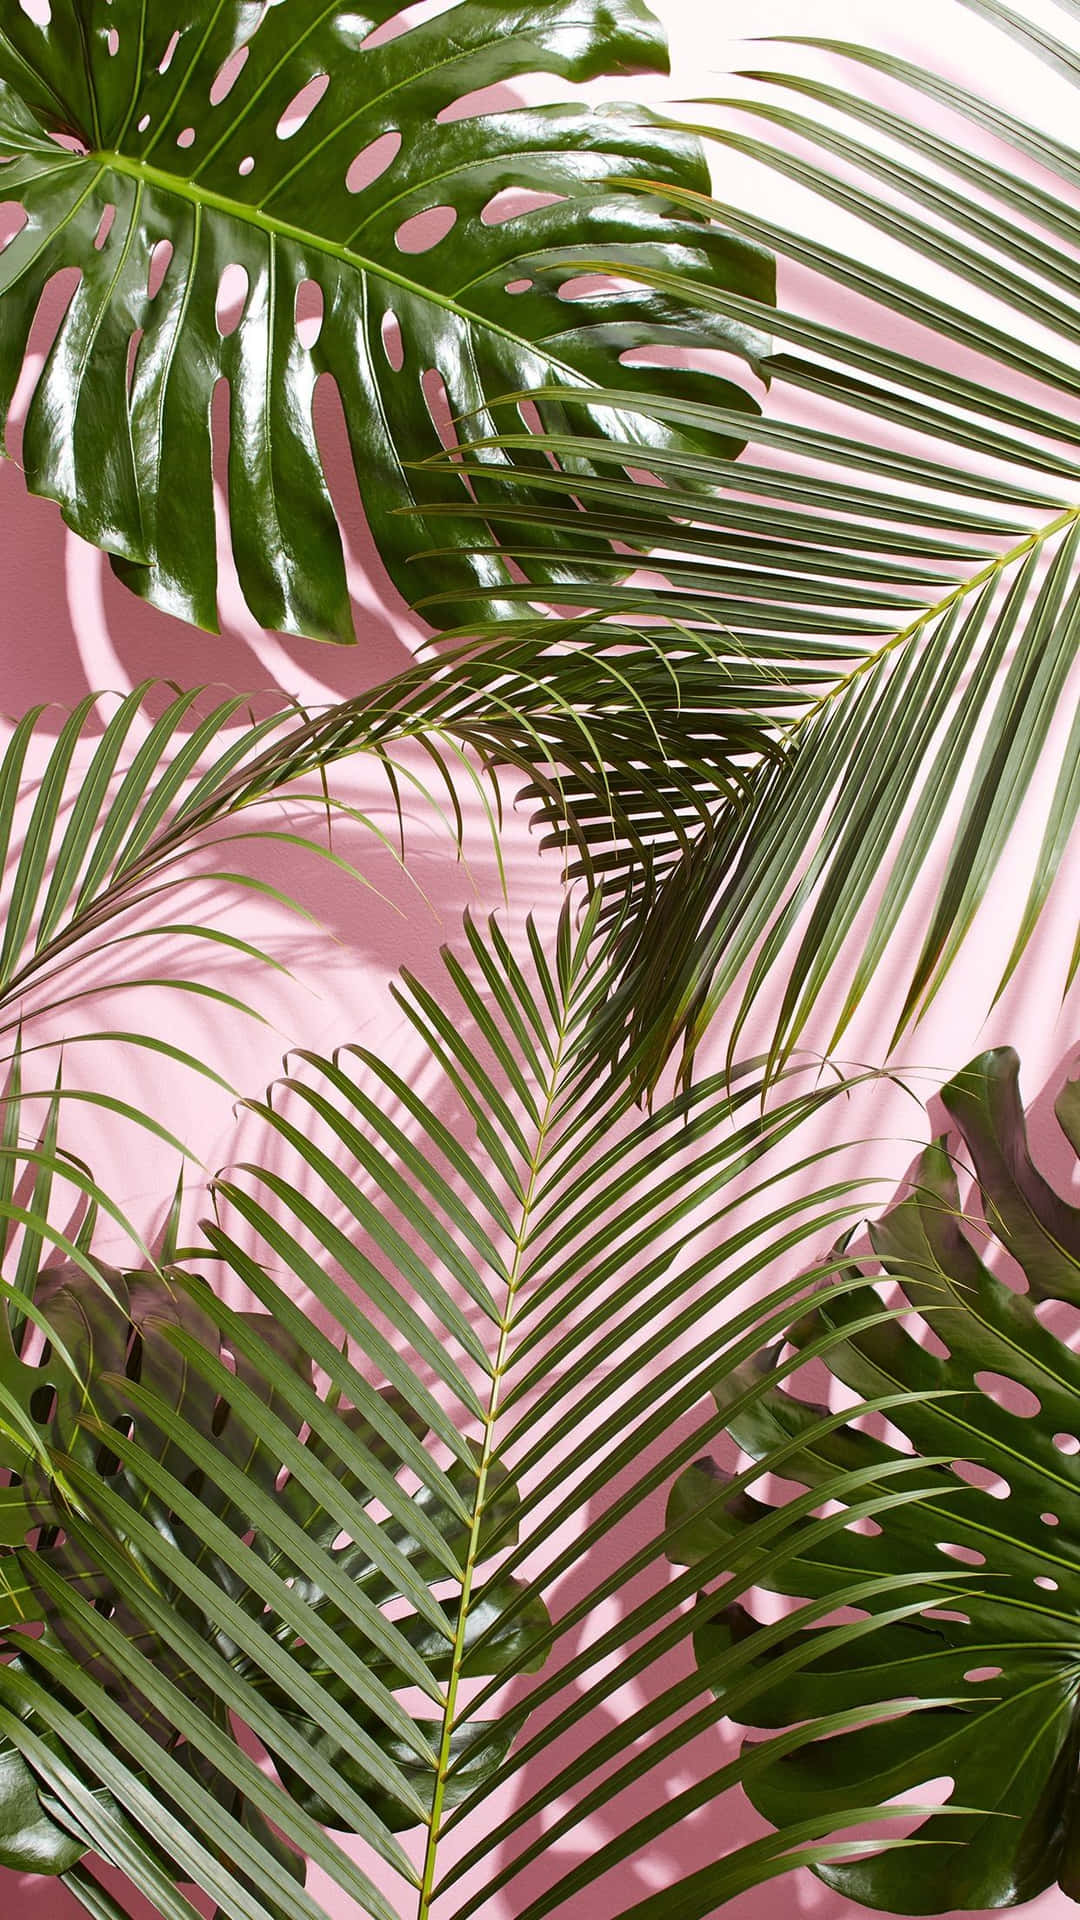 Tropical iPhone Wallpaper  The Best Wallpaper Ideas Thatll Make Your  Phone Look Aesthetically Pleasing  POPSUGAR Tech Photo 11